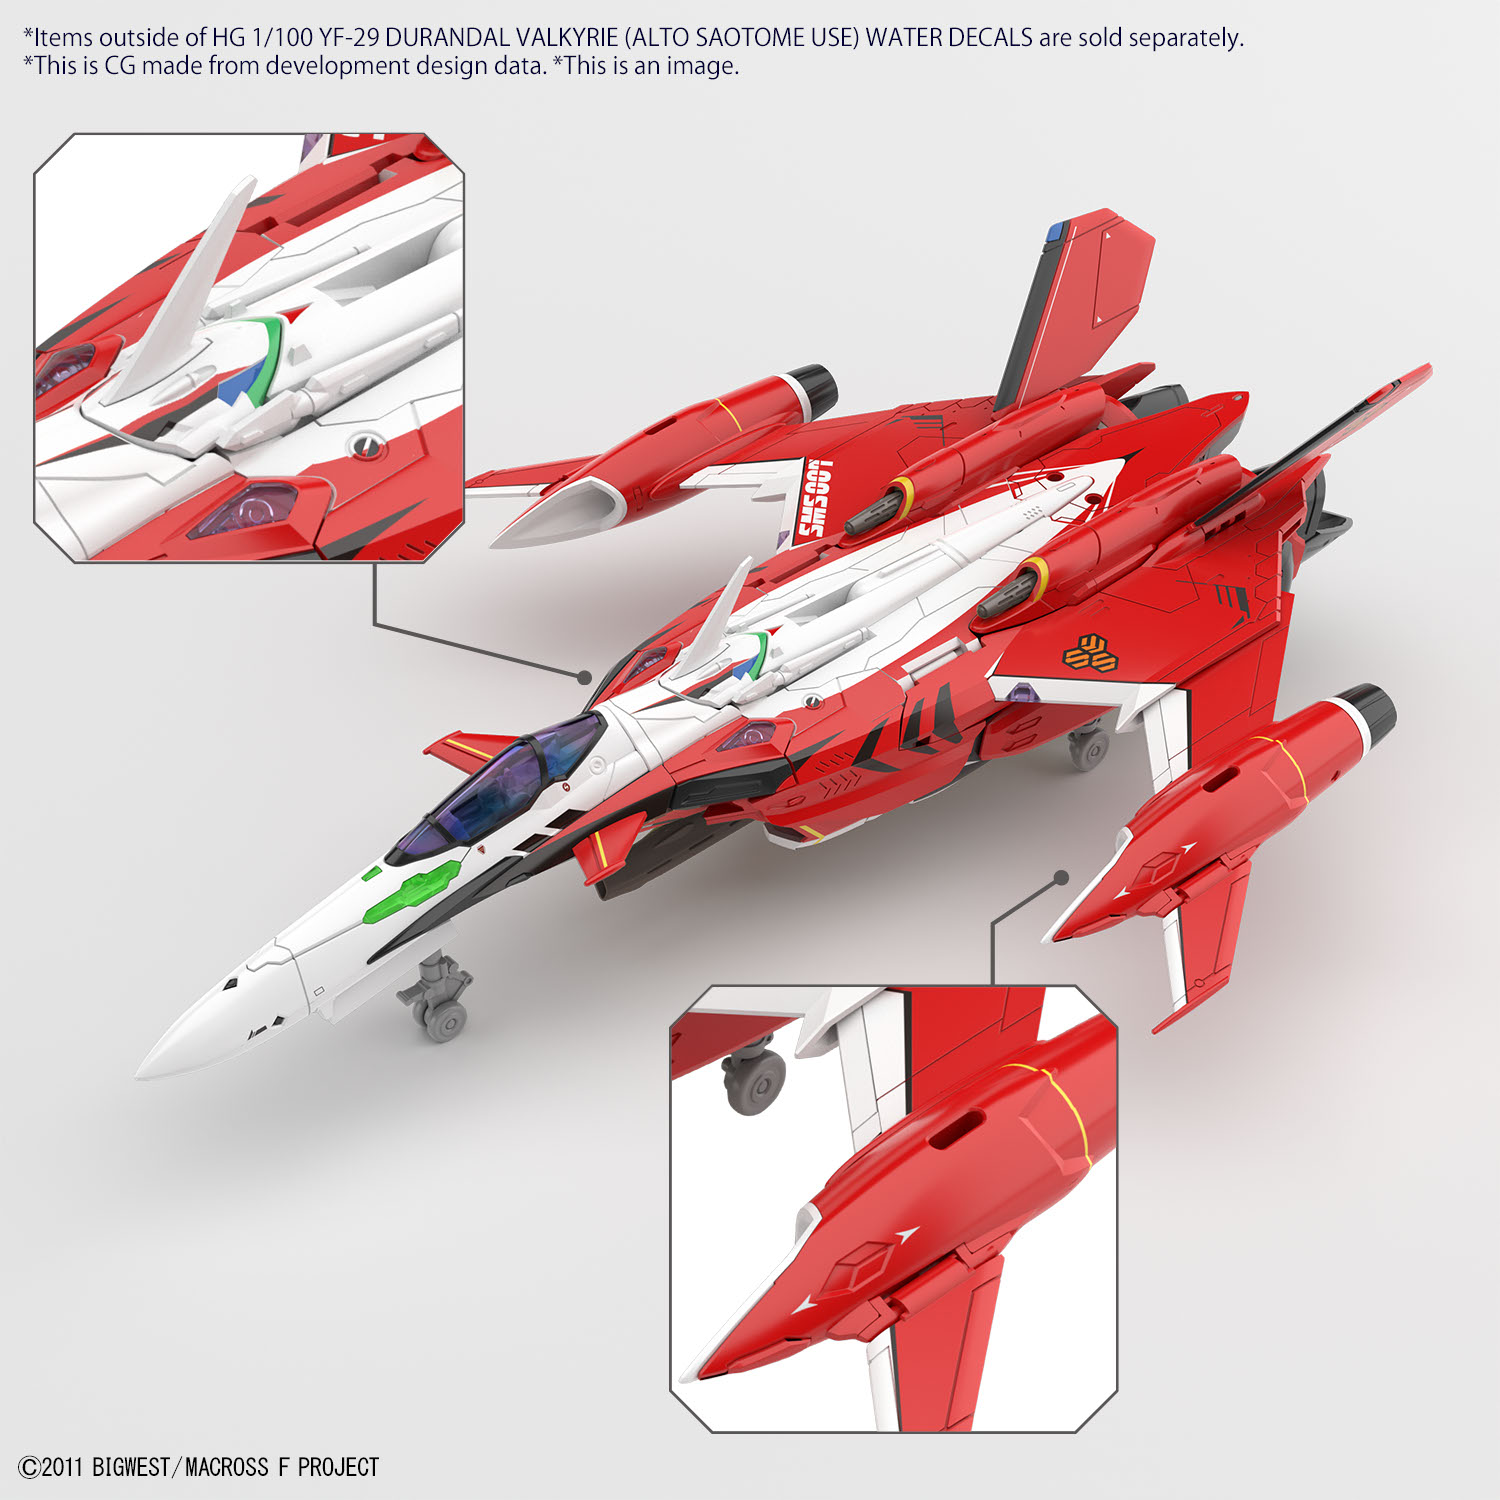 HG YF-29 Durandal Valkyrie (Alto Saotome Use) Water Decals Macross Frontier 1/100